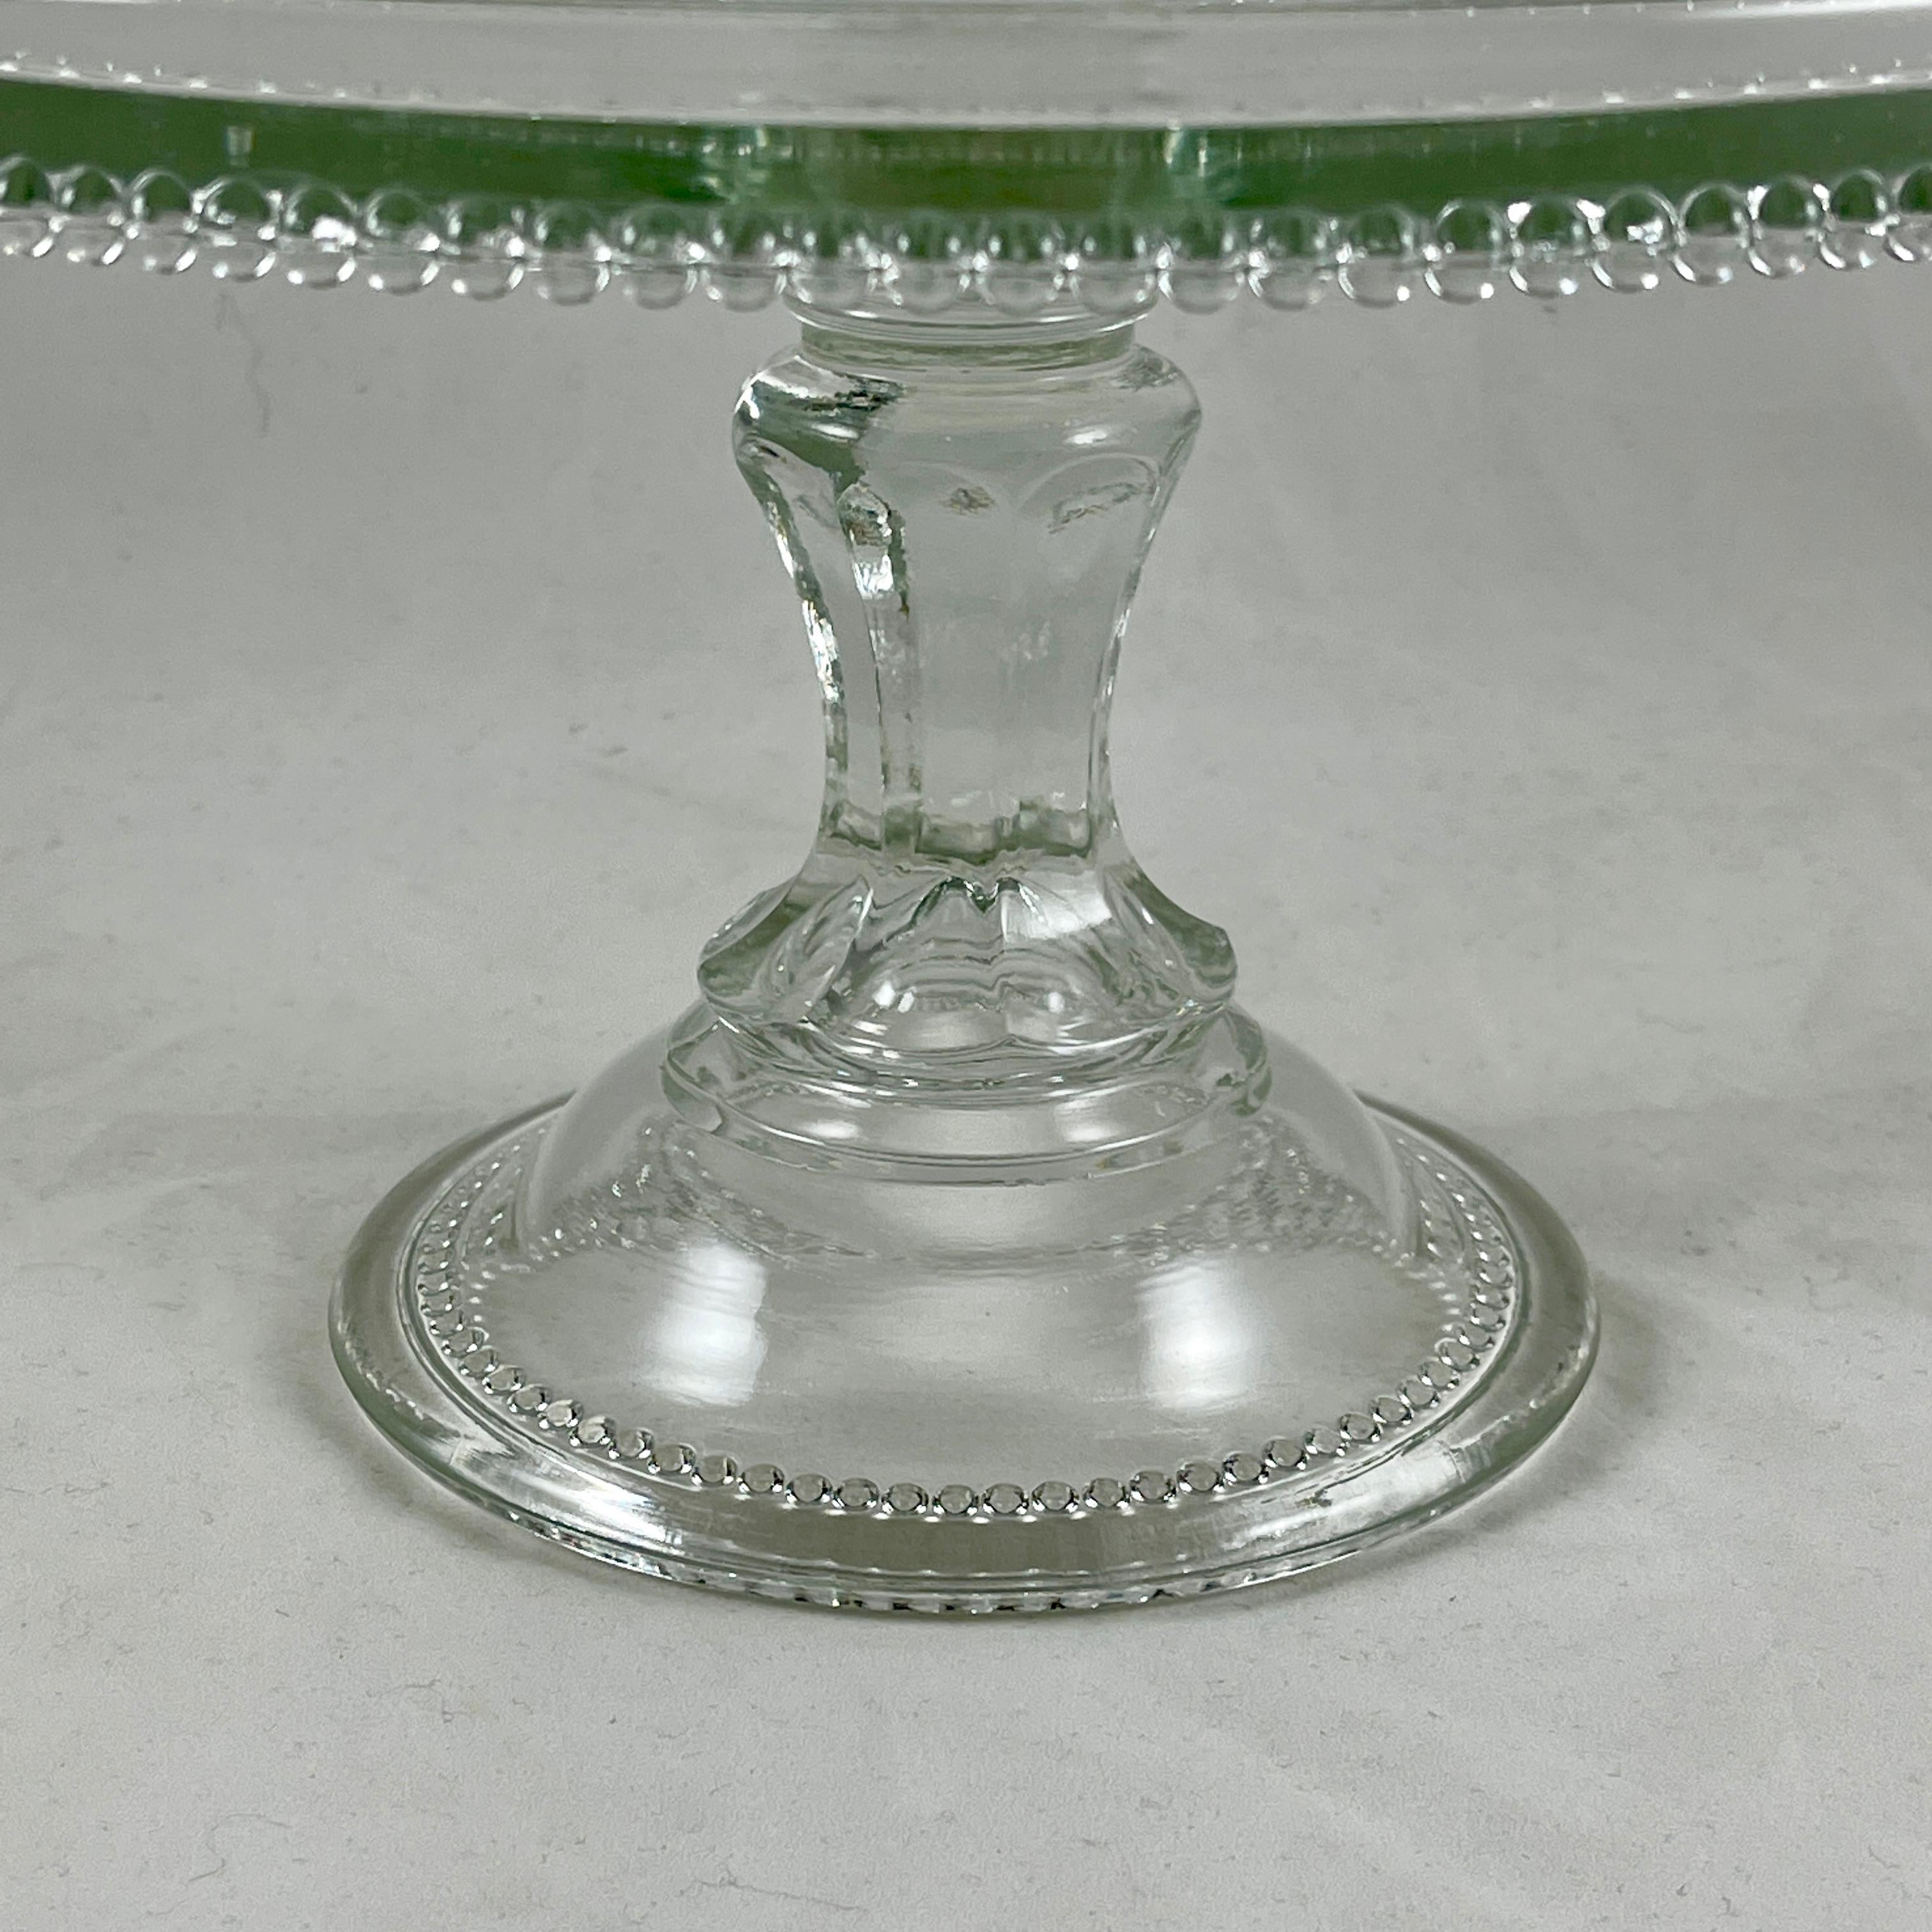 Molded Early American Pressed Nonflint Colorless Glass Beaded Cake Stand